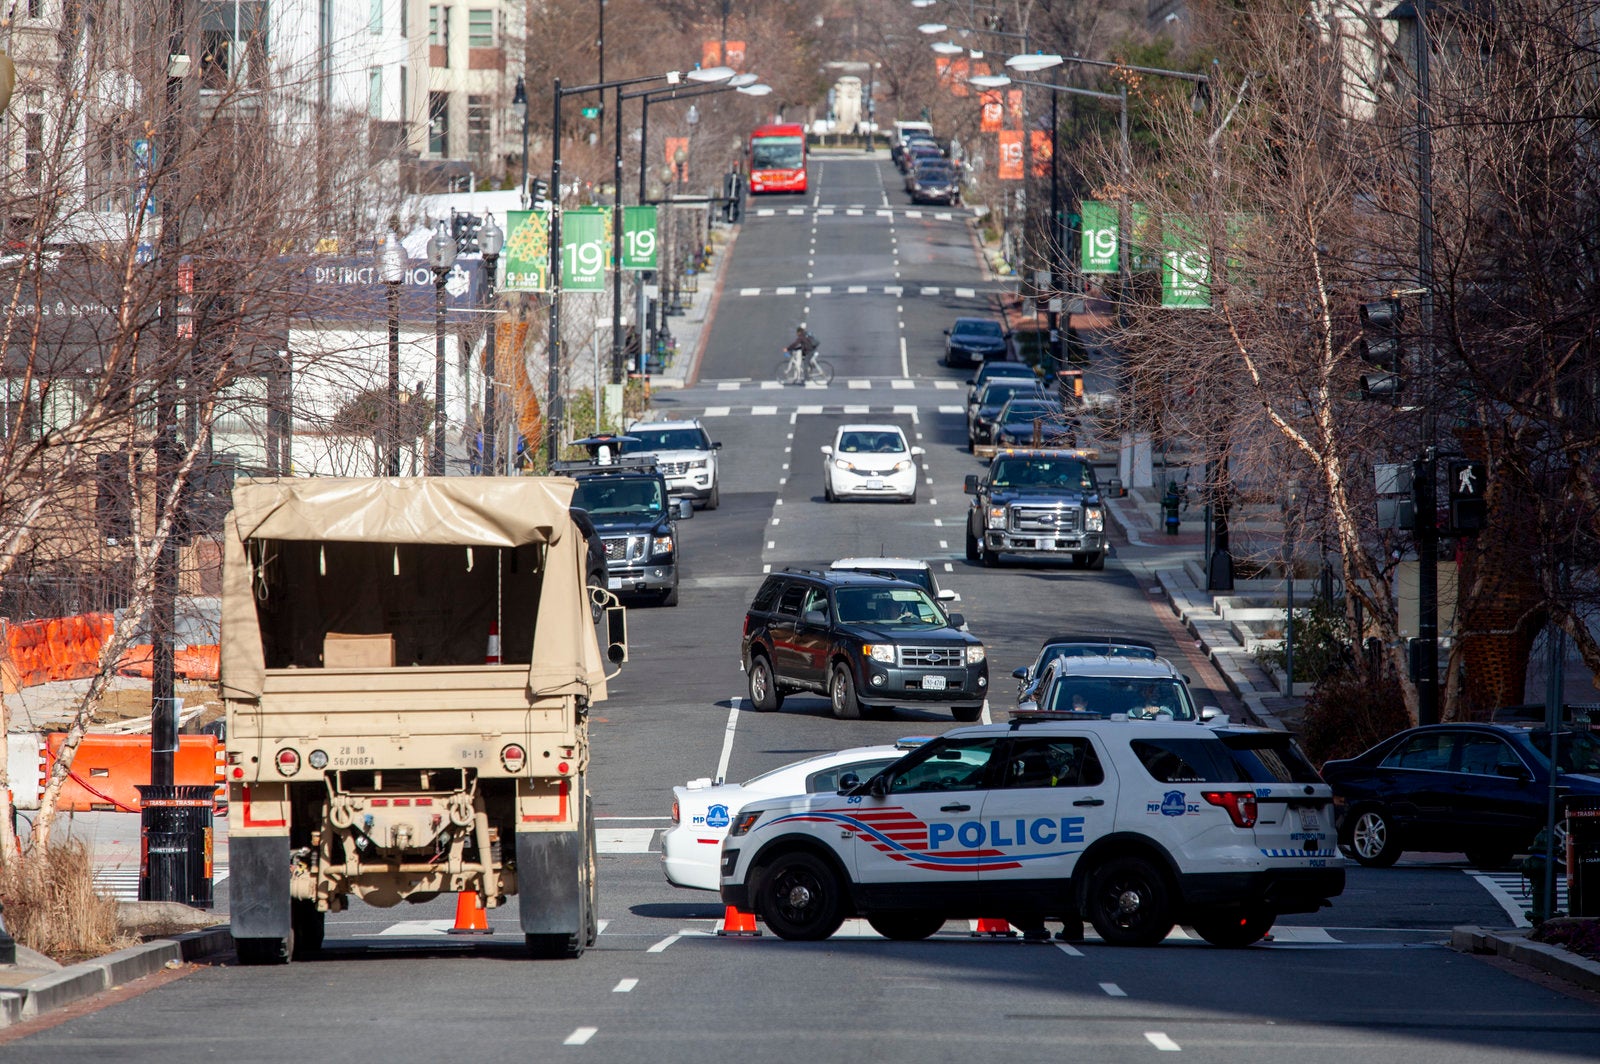 Military and police vehicles block off street traffic in D.C.